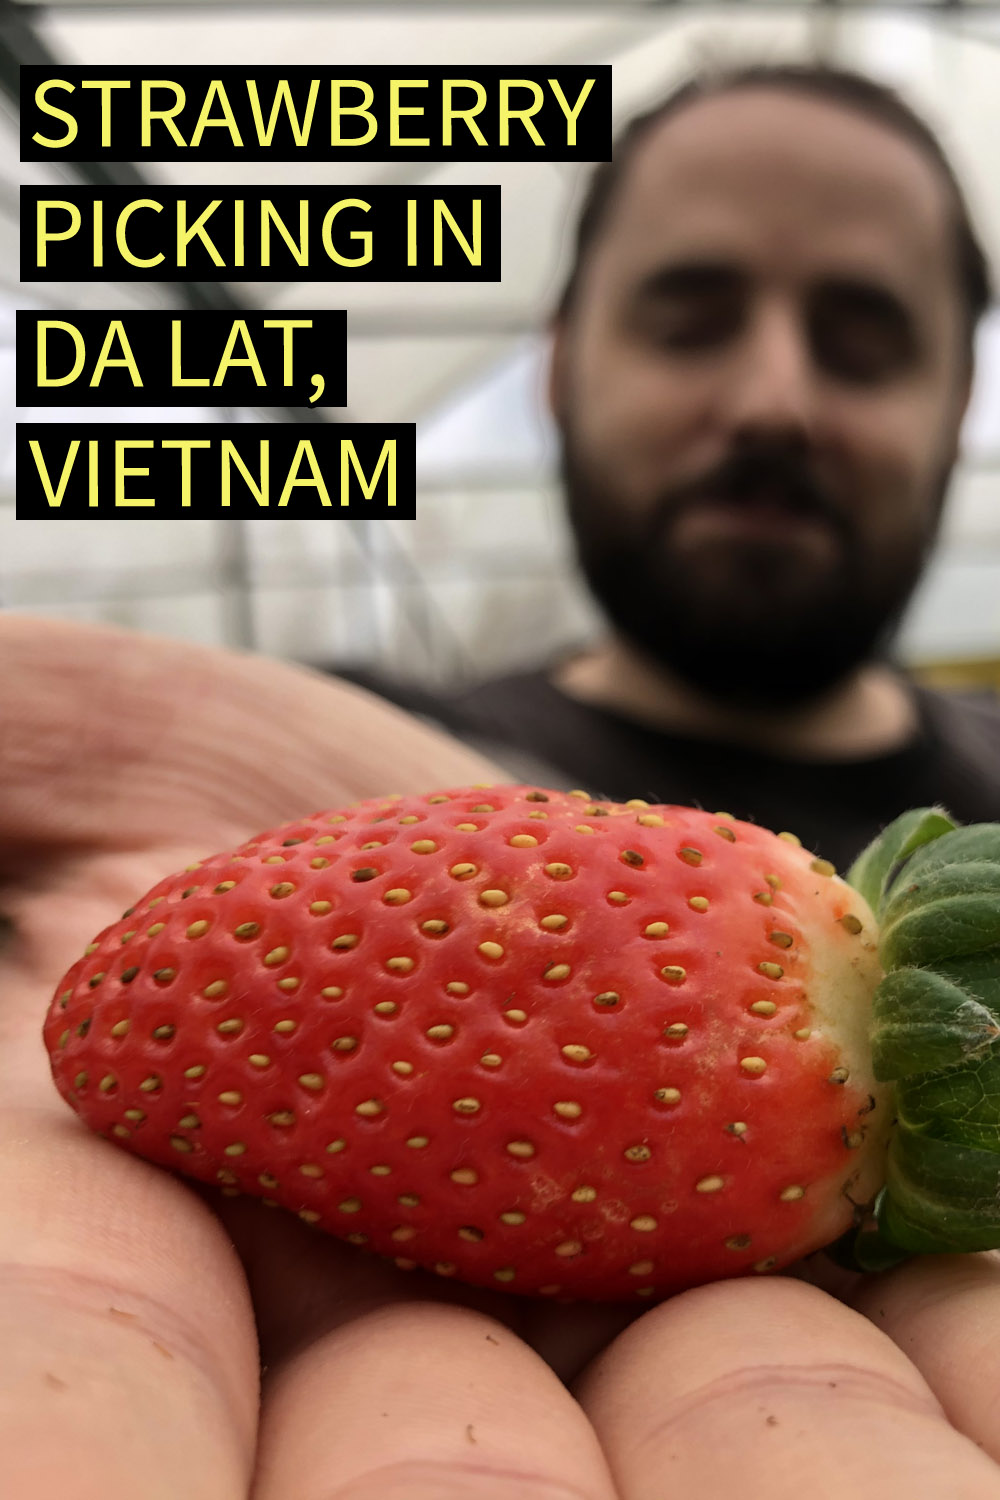 Image contains a photo of a man holding a bright red strawberry in his right hand. The strawberry is clearly visible in the foreground while the man is out of focus in the background. In the top left of the image, there is yellow text that says "Strawberry Picking in Da Lat, Vietnam".